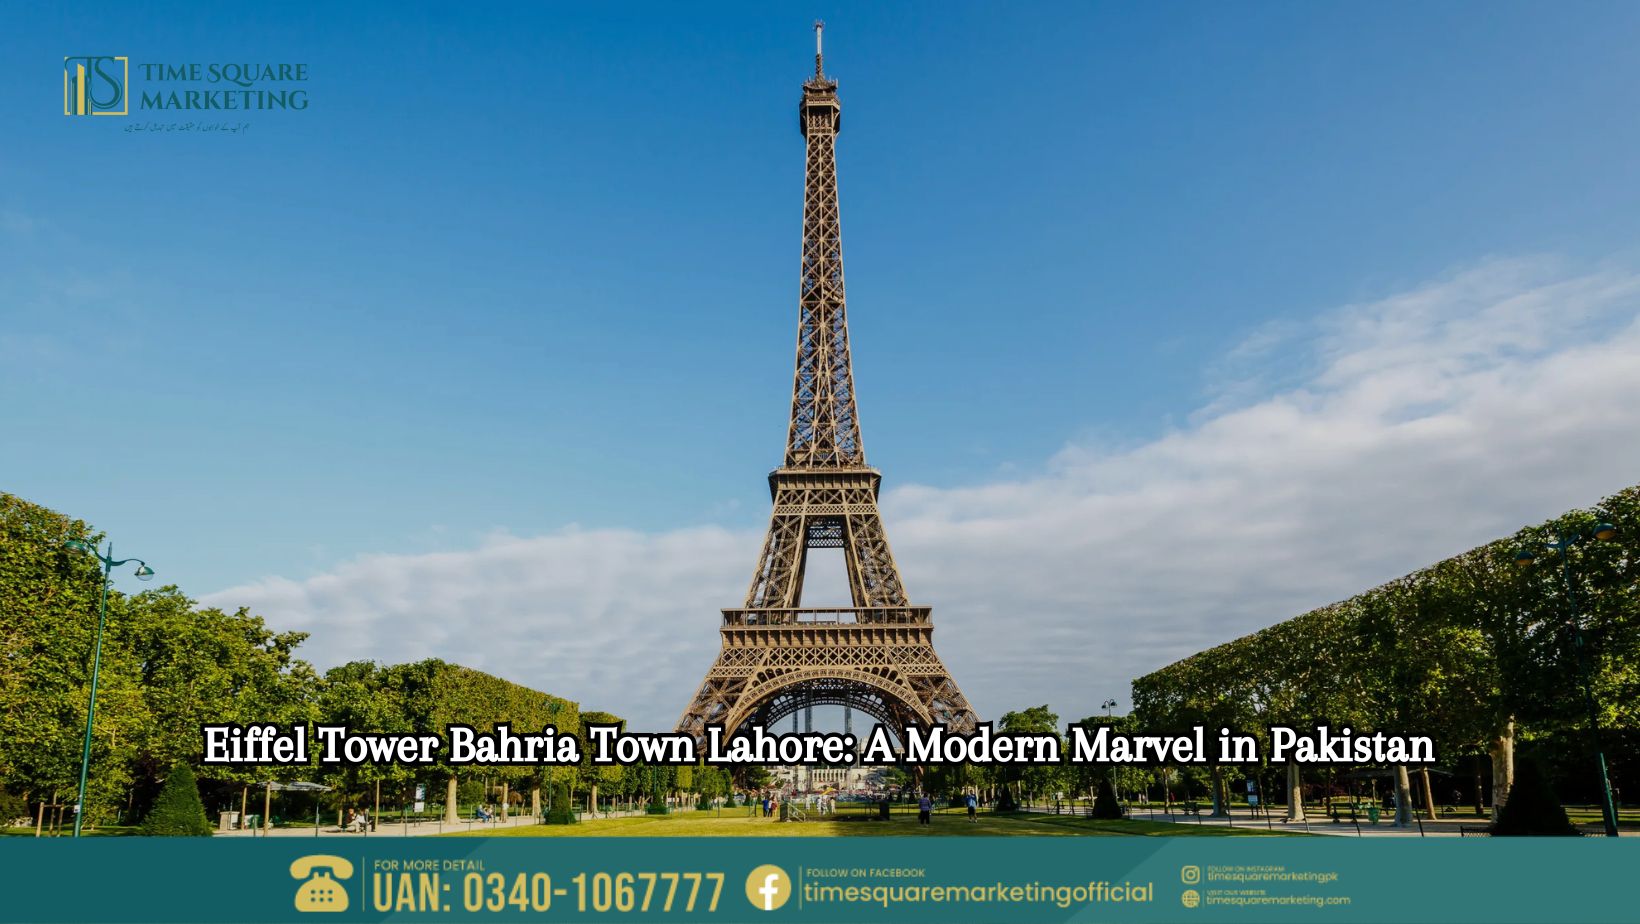 Eiffel Tower Bahria Town Lahore A Modern Marvel in Pakistan